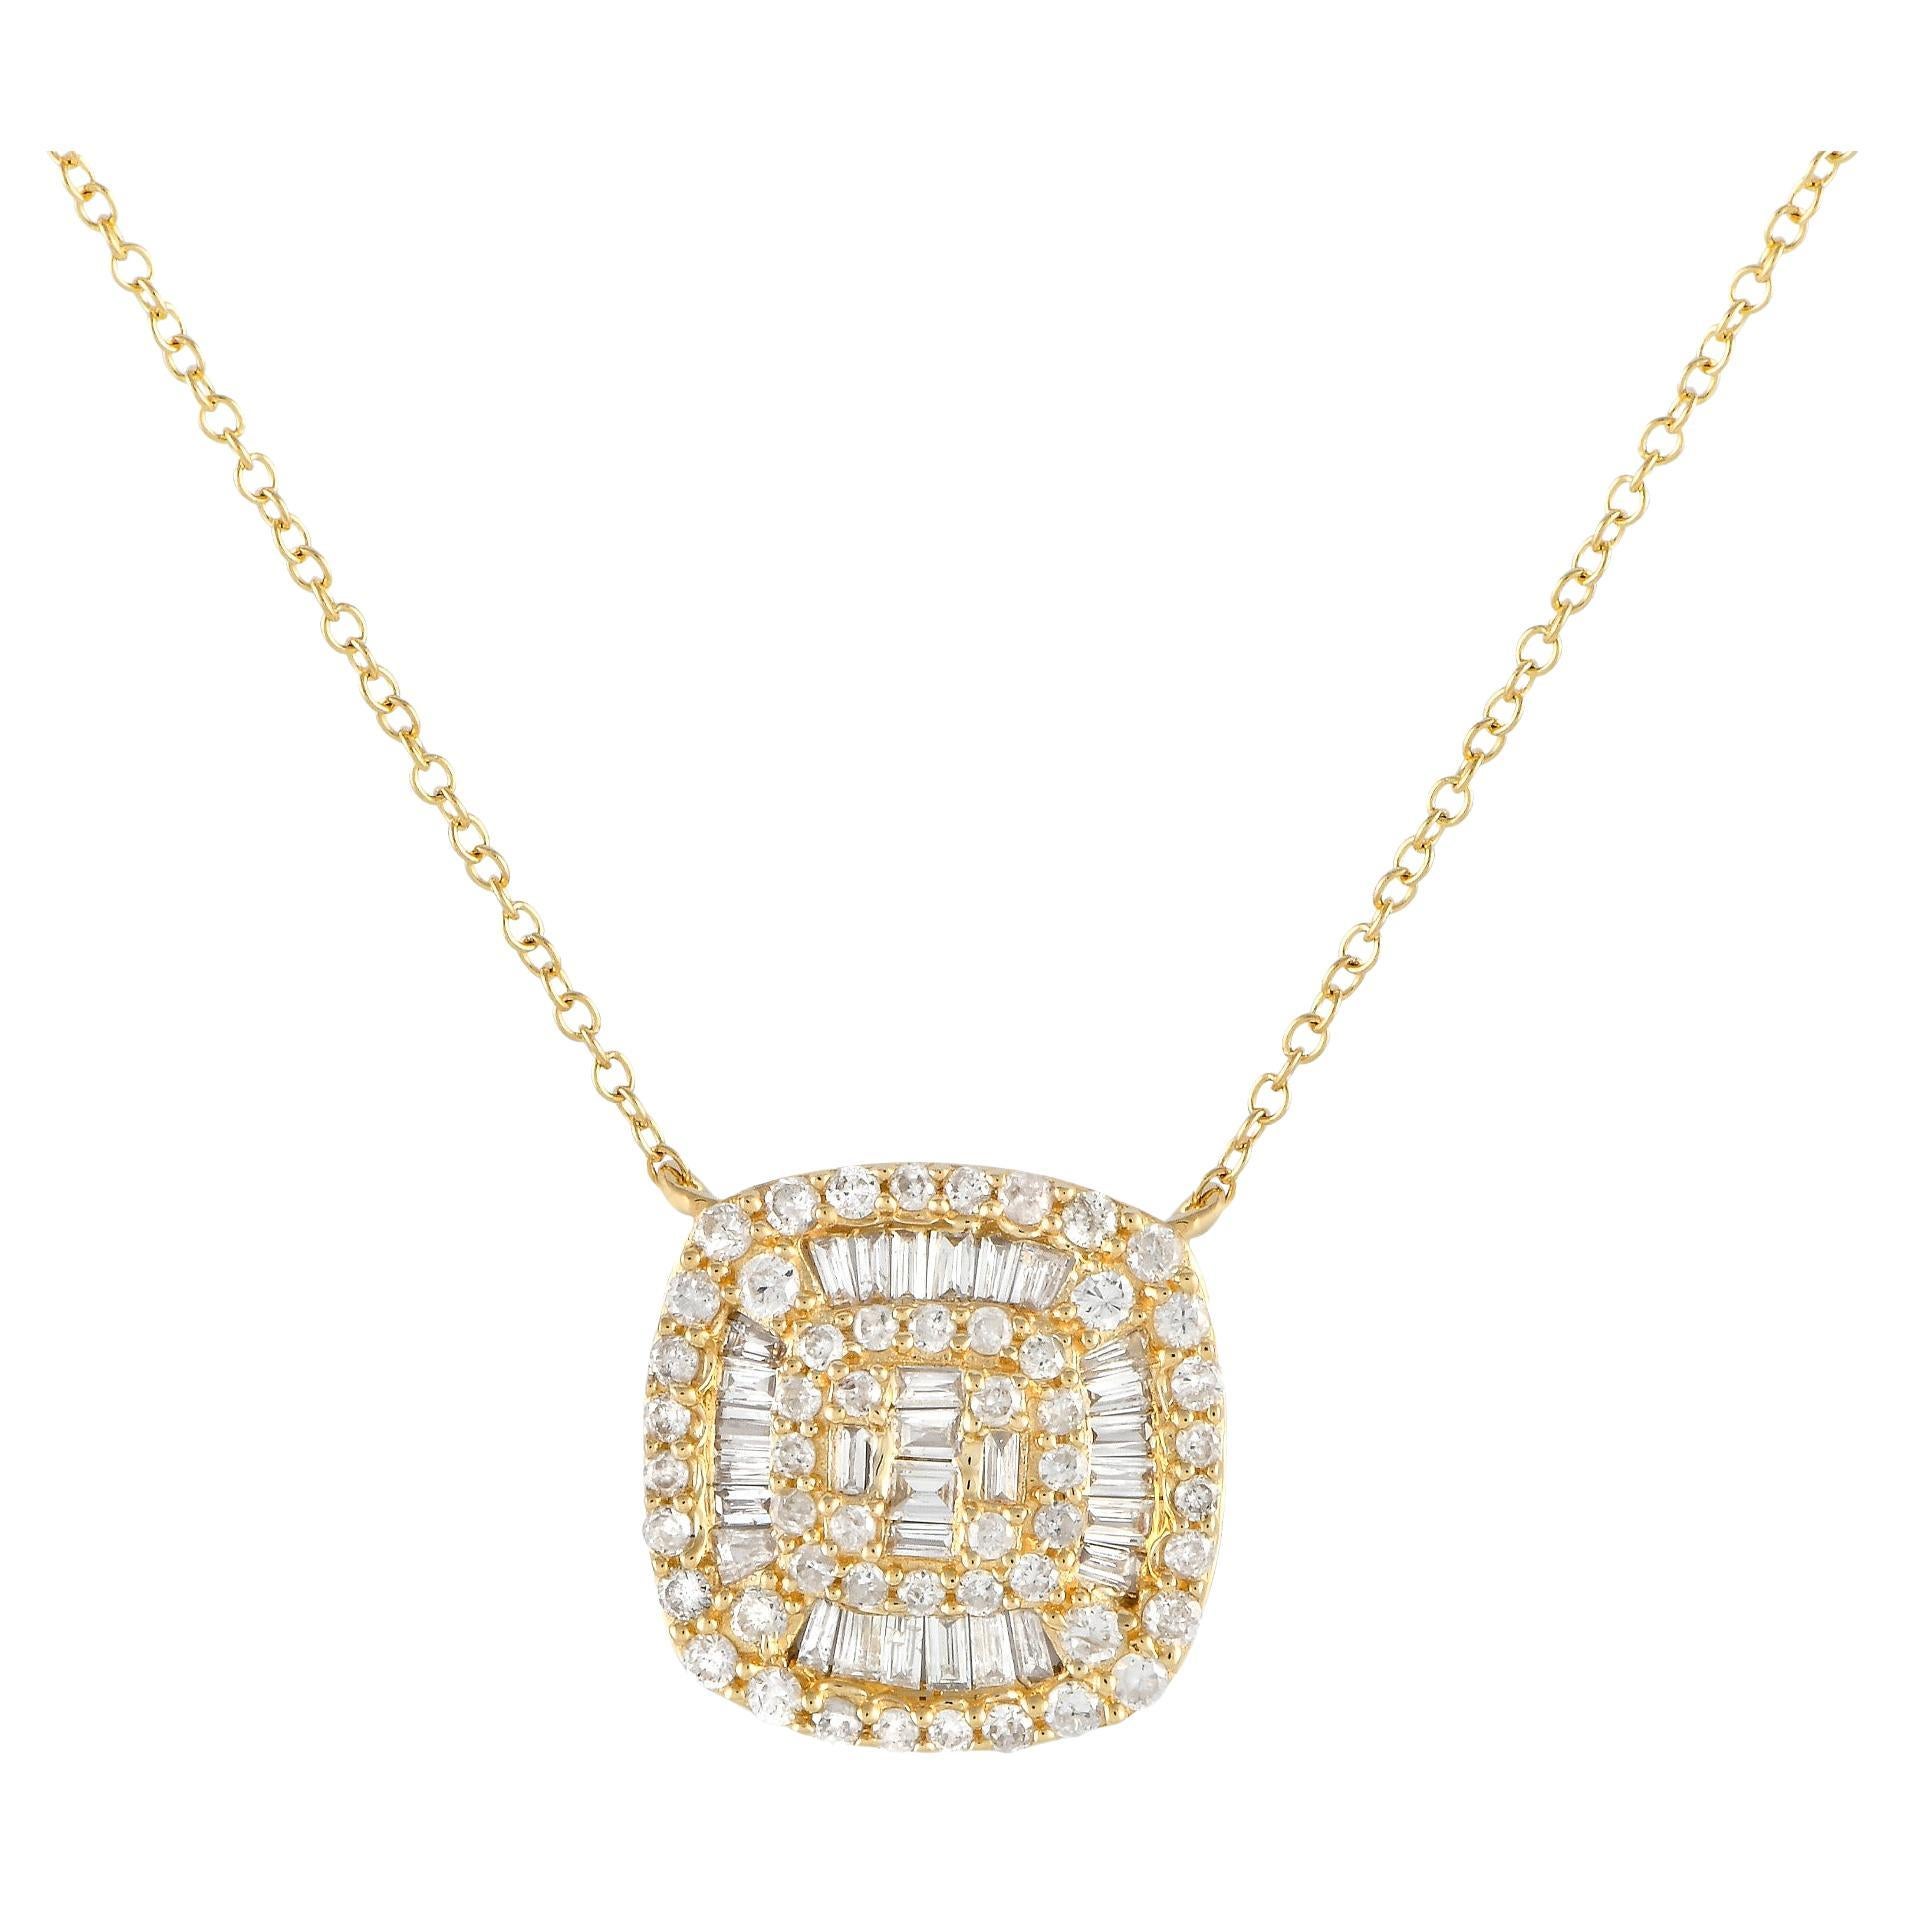 LB Exclusive 14K Yellow Gold 0.50ct Diamond Cluster Cushion Necklace PN14750